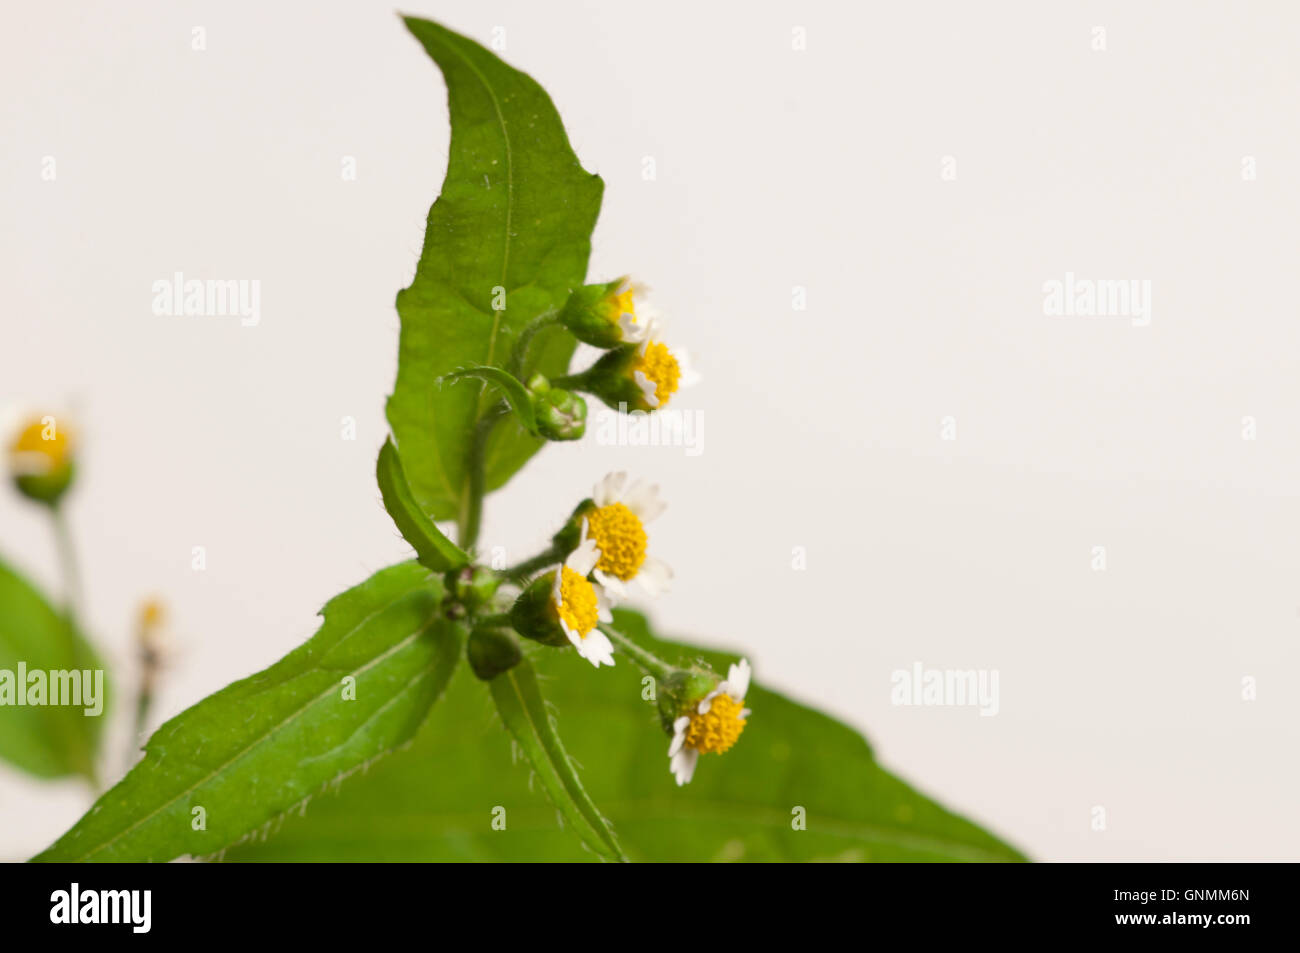 Galinsoga flowers on a green background, close up Stock Photo